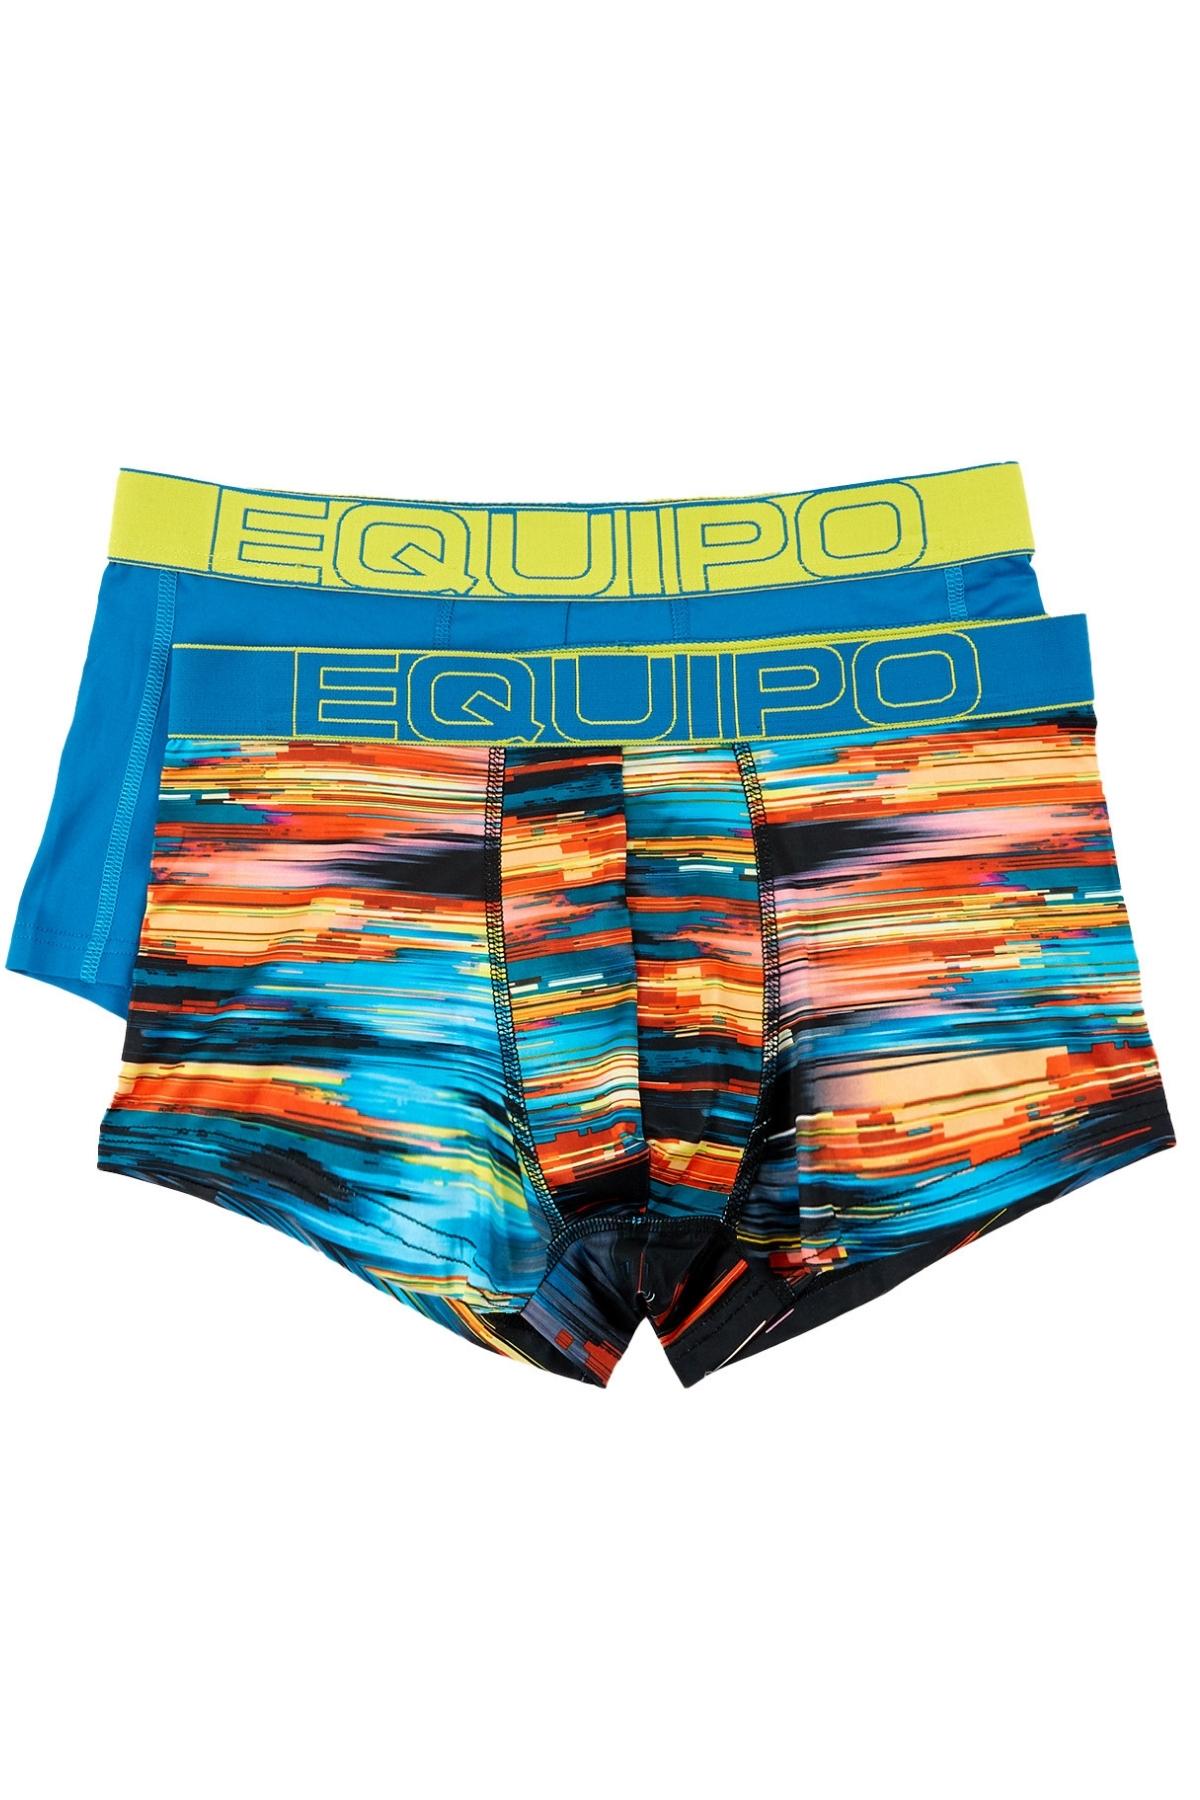 Equipo Blue and Tribal Quick Dry Performace 2-Pack Boxer Briefs –  CheapUndies